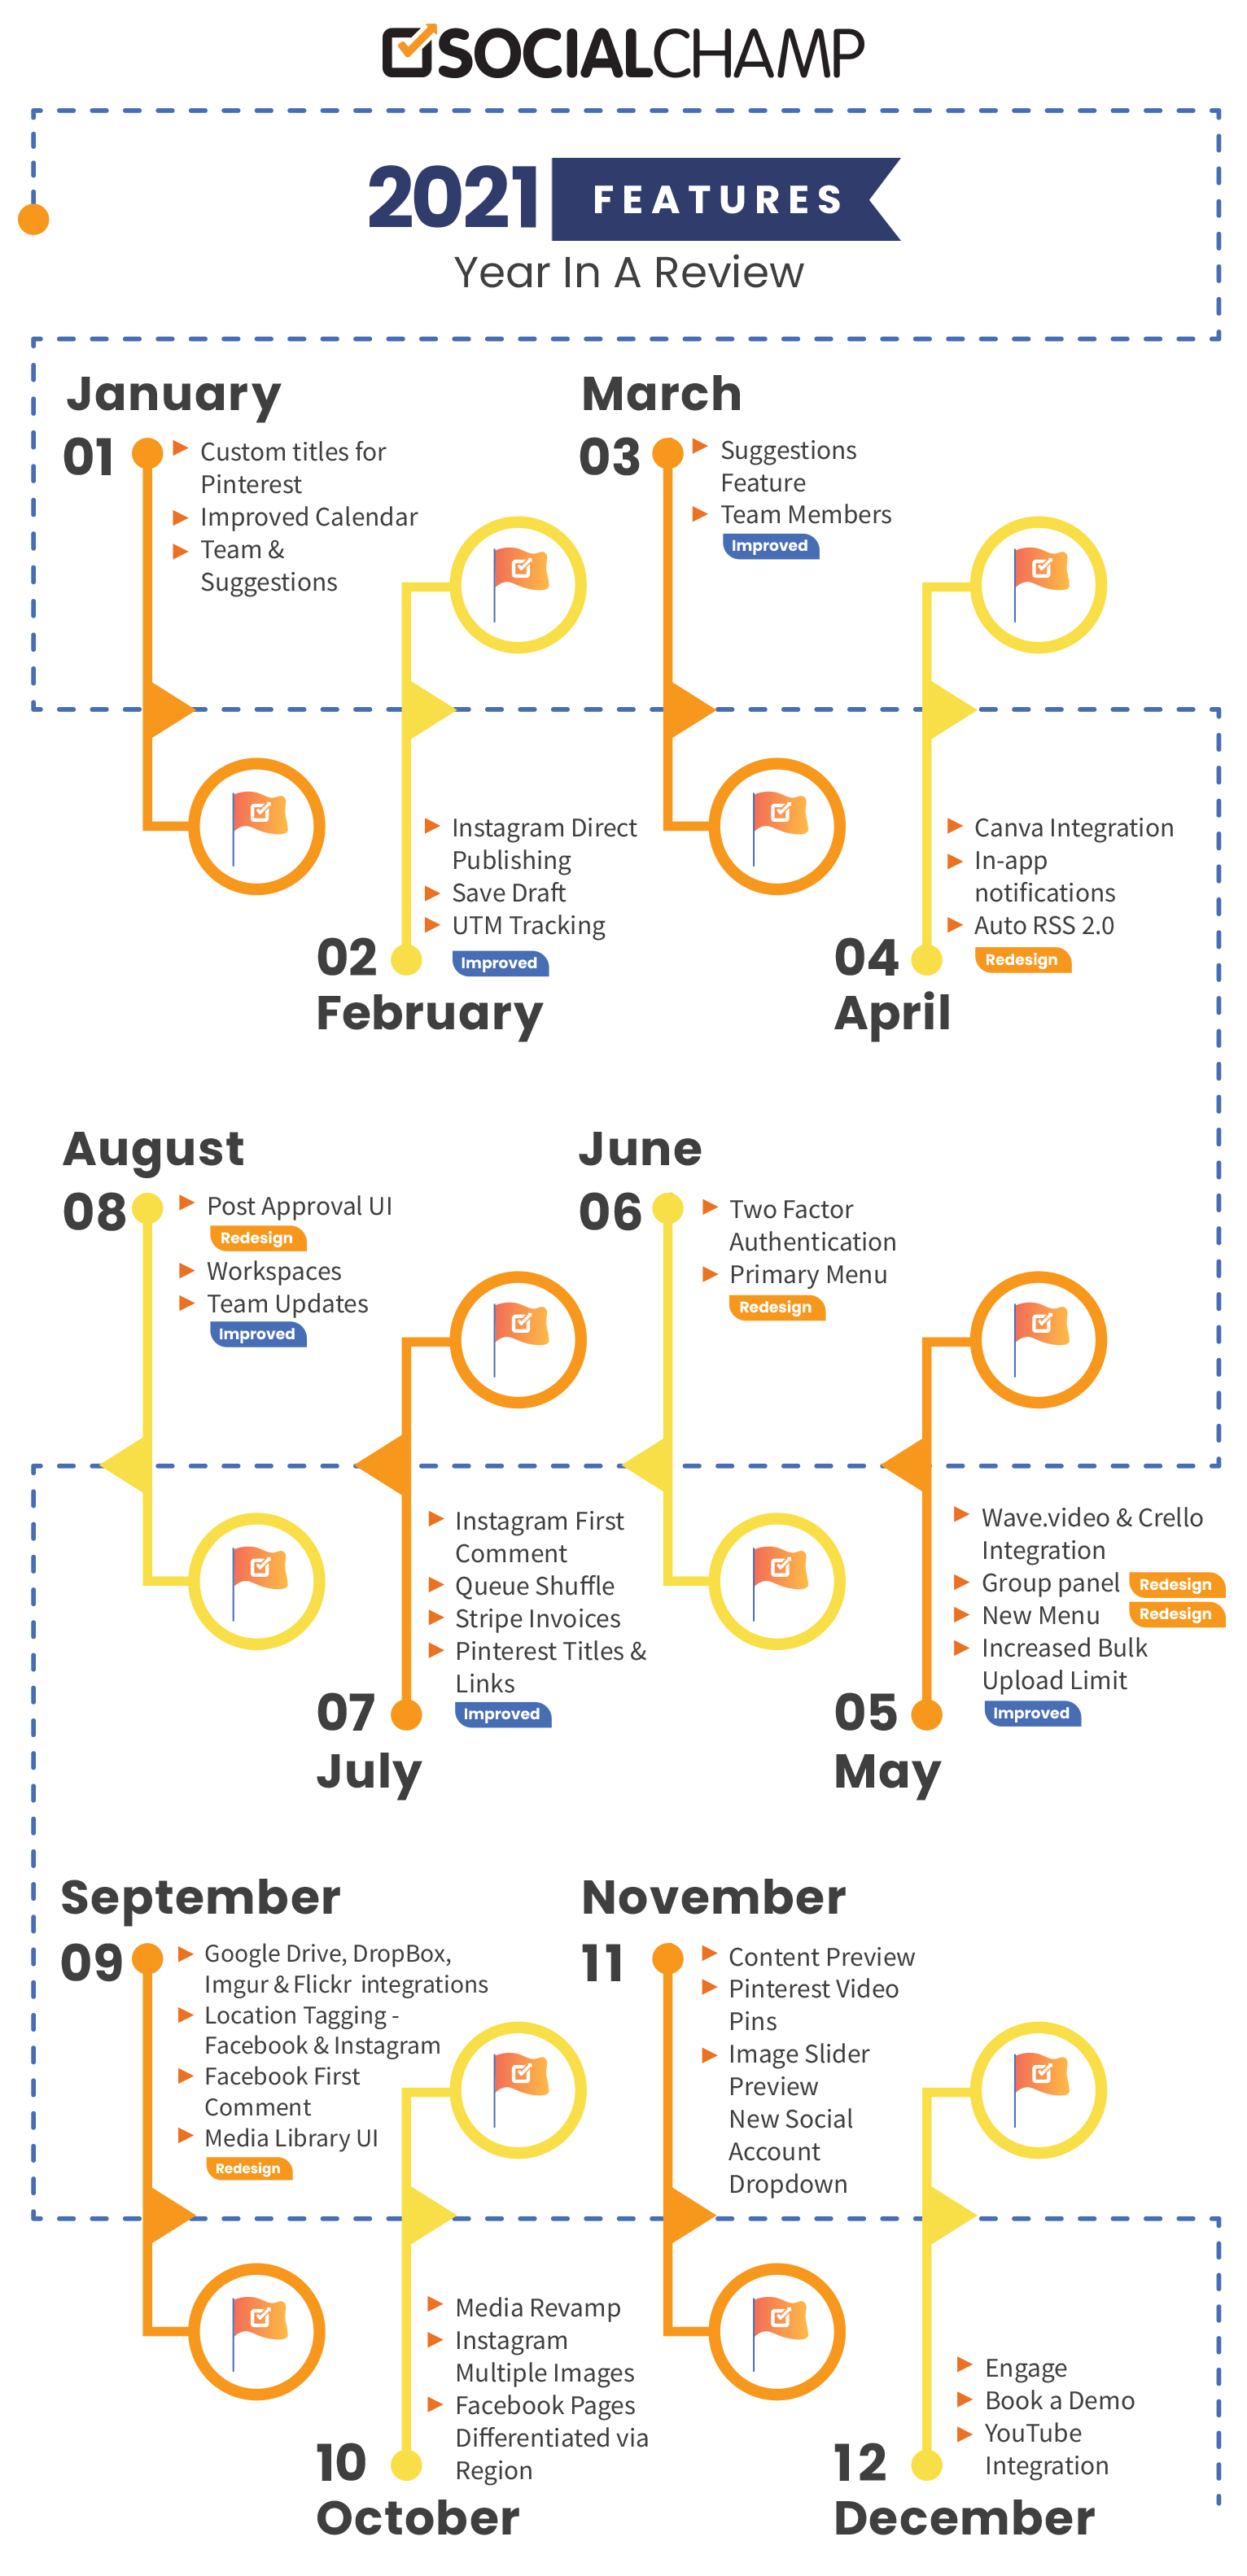 Social Champ feature road map - yearly review 2021